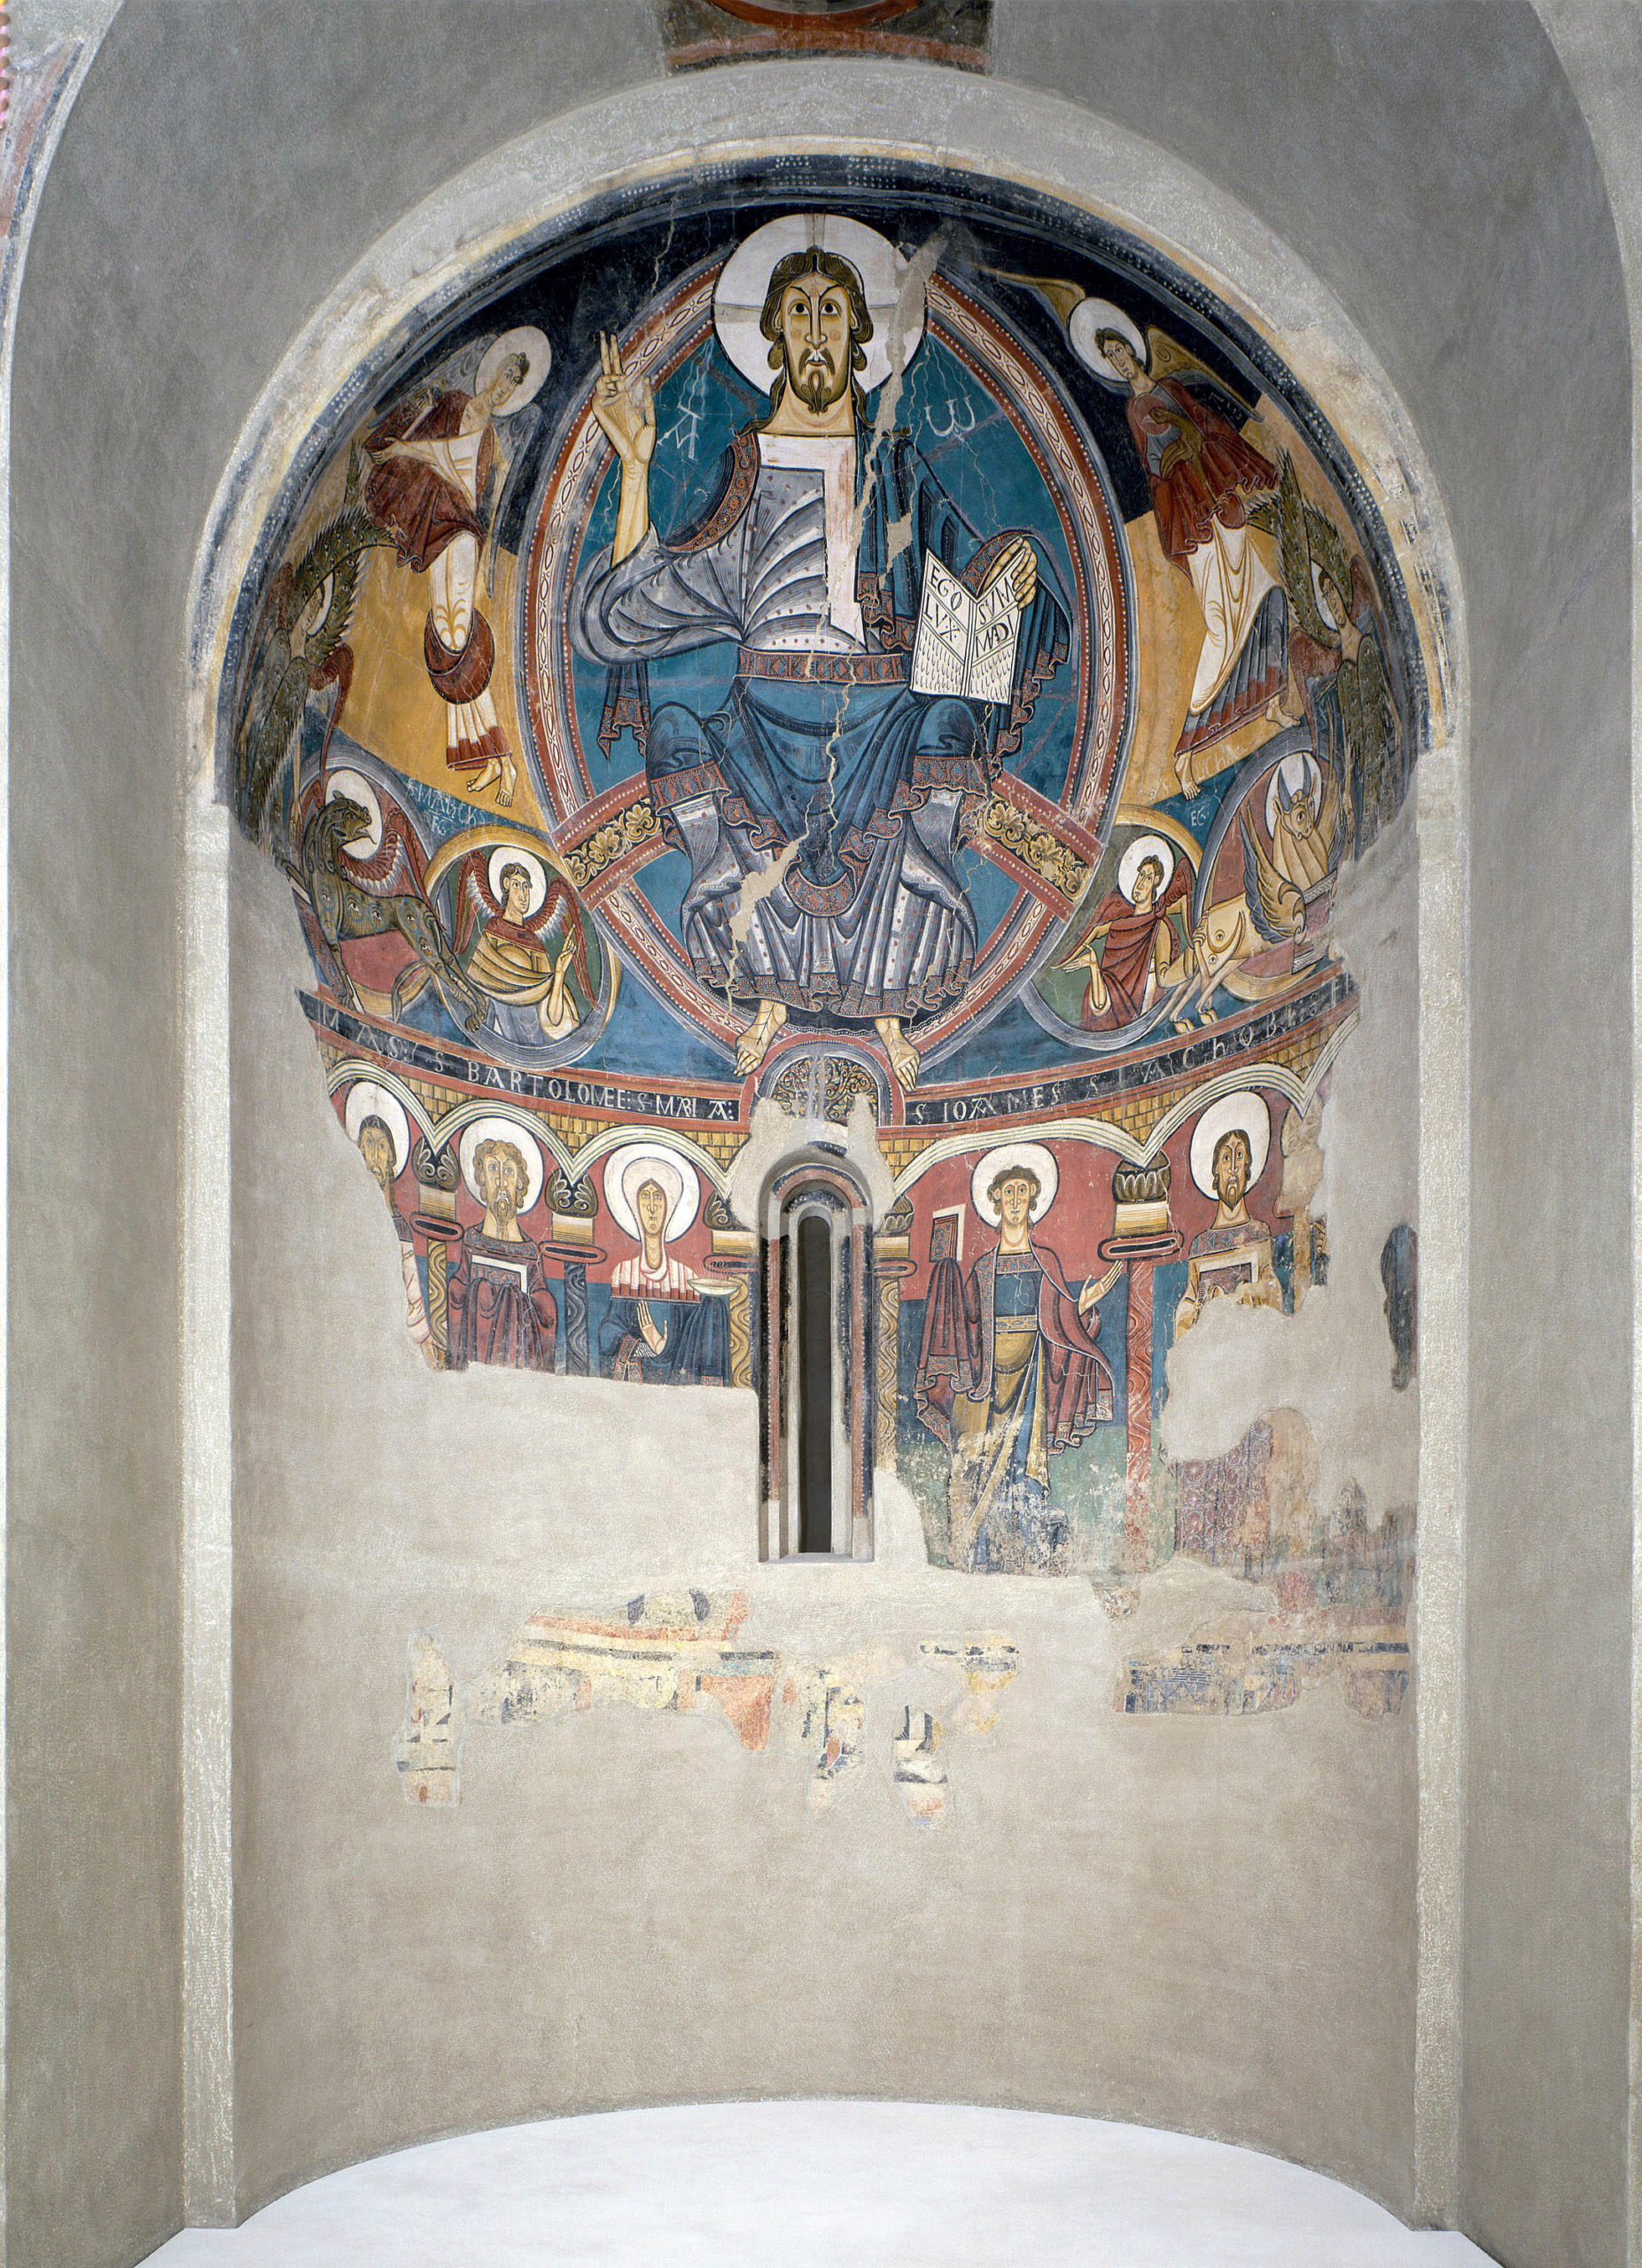 Christ in Majesty, fresco, originally in Sant Climent (Saint Clement in Catalan), outside the village of Taüll, Boí valley, Spain, today in MNAC